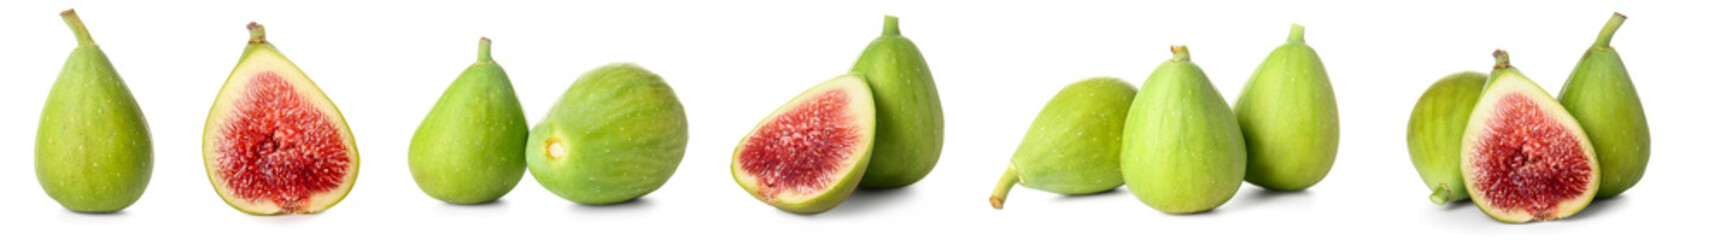 Poster - Set of fresh green figs on white background